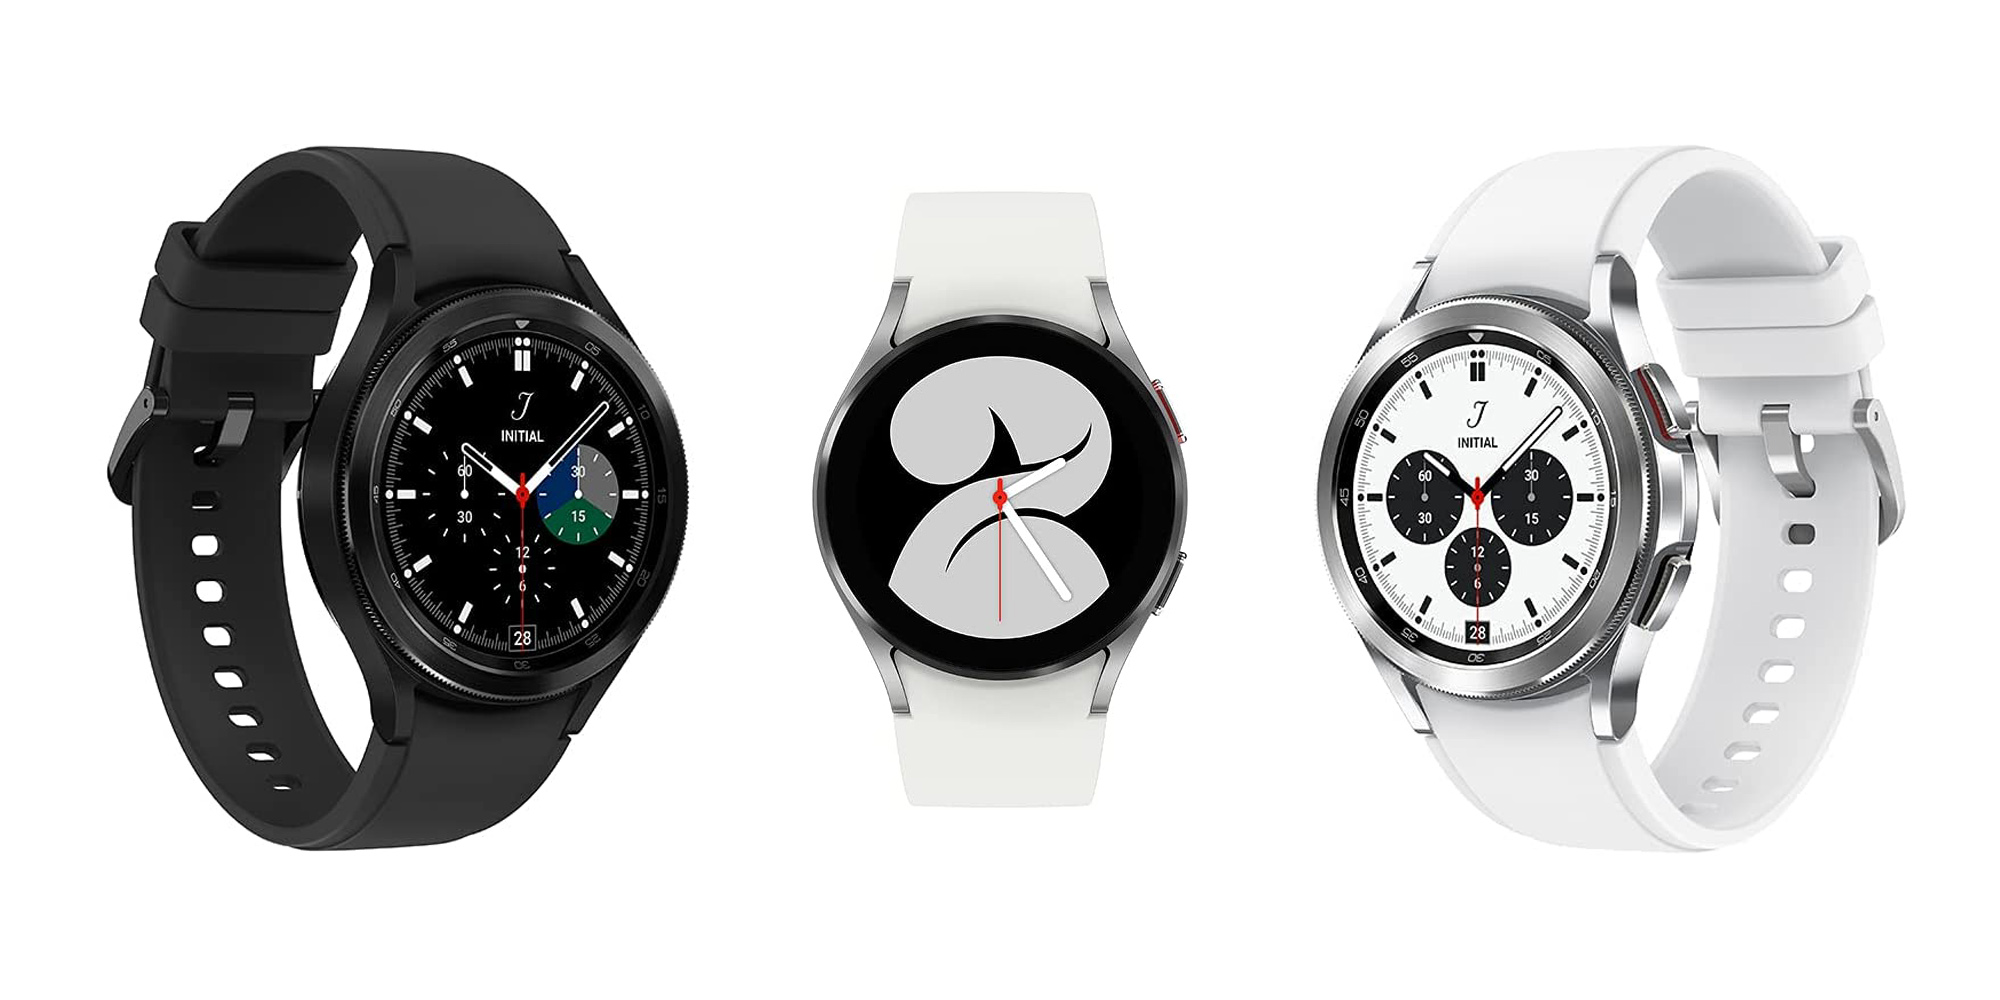 Galaxy Watch 4 price leaked by early Amazon listing - 9to5Google